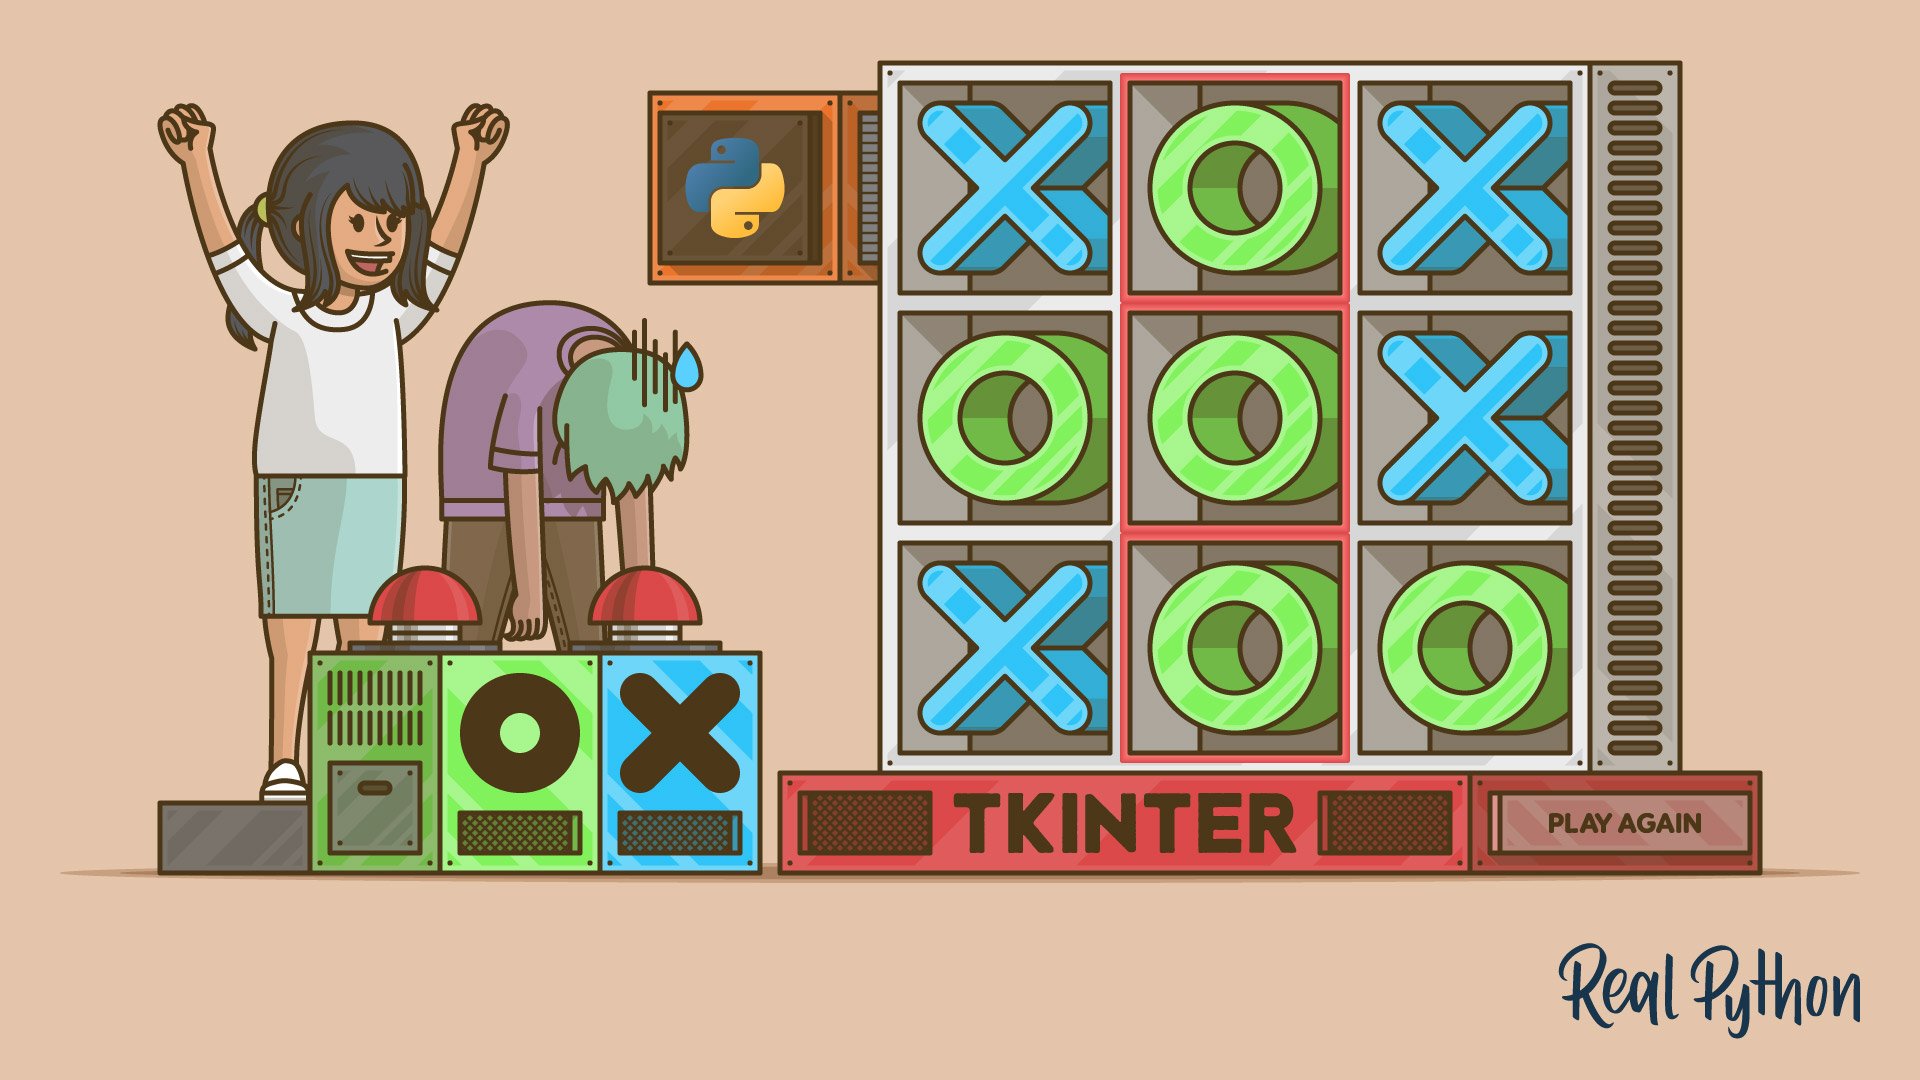 Build a Tic-Tac-Toe Game With Python and Tkinter